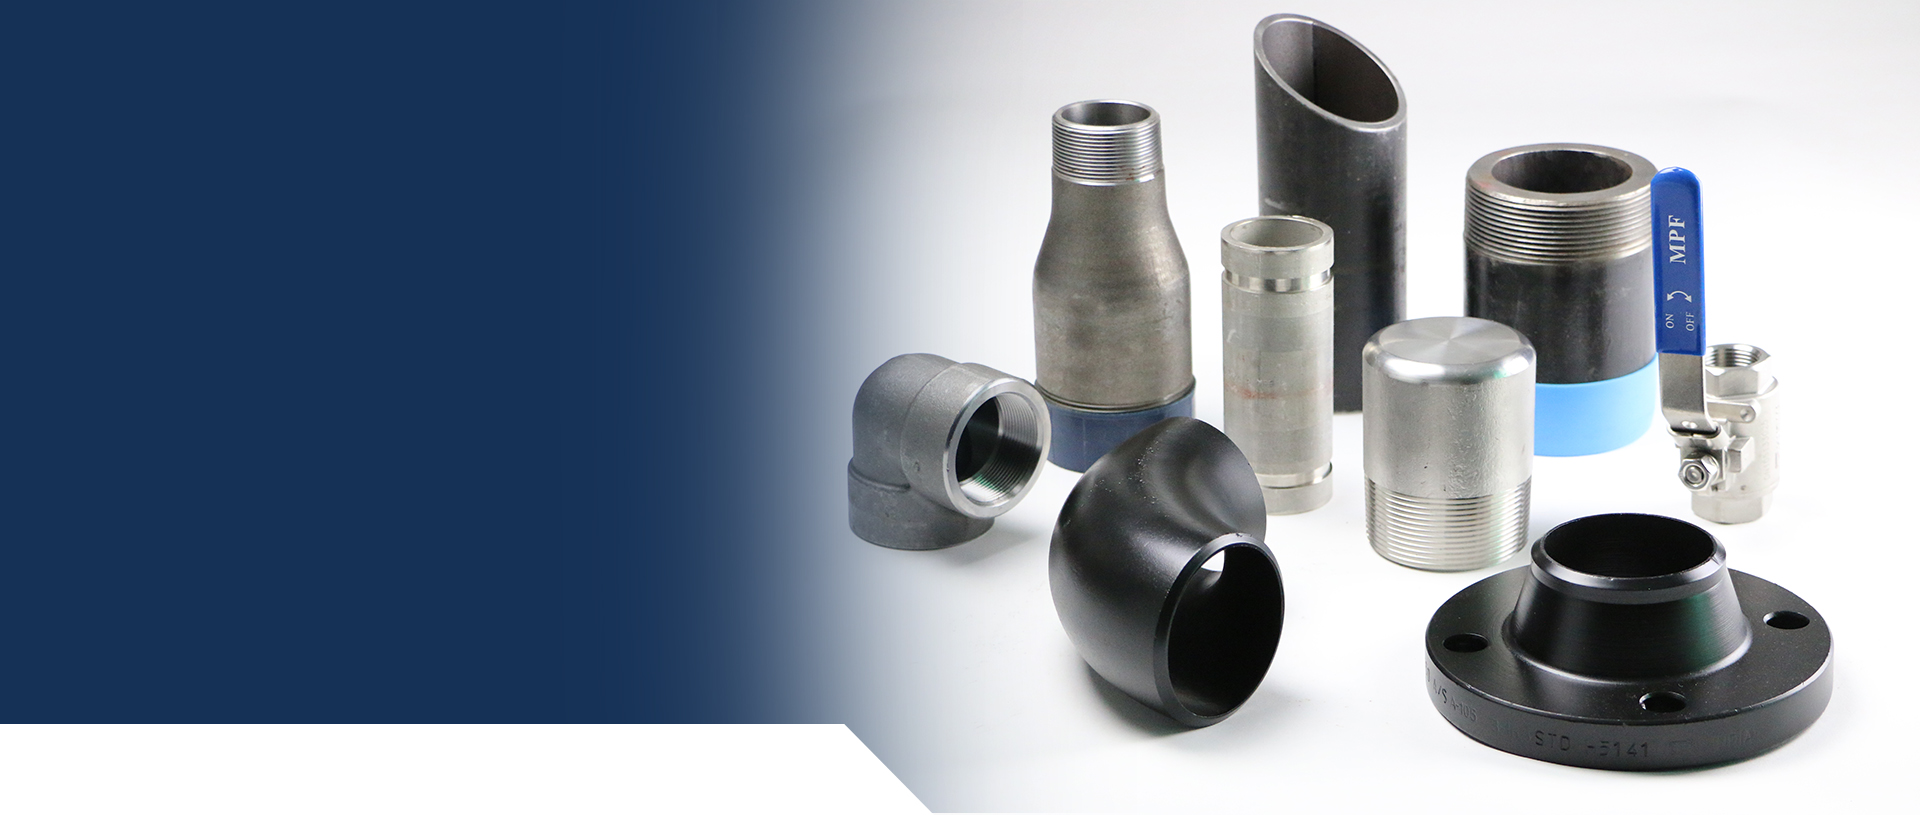 MOPIPE Fittings Company